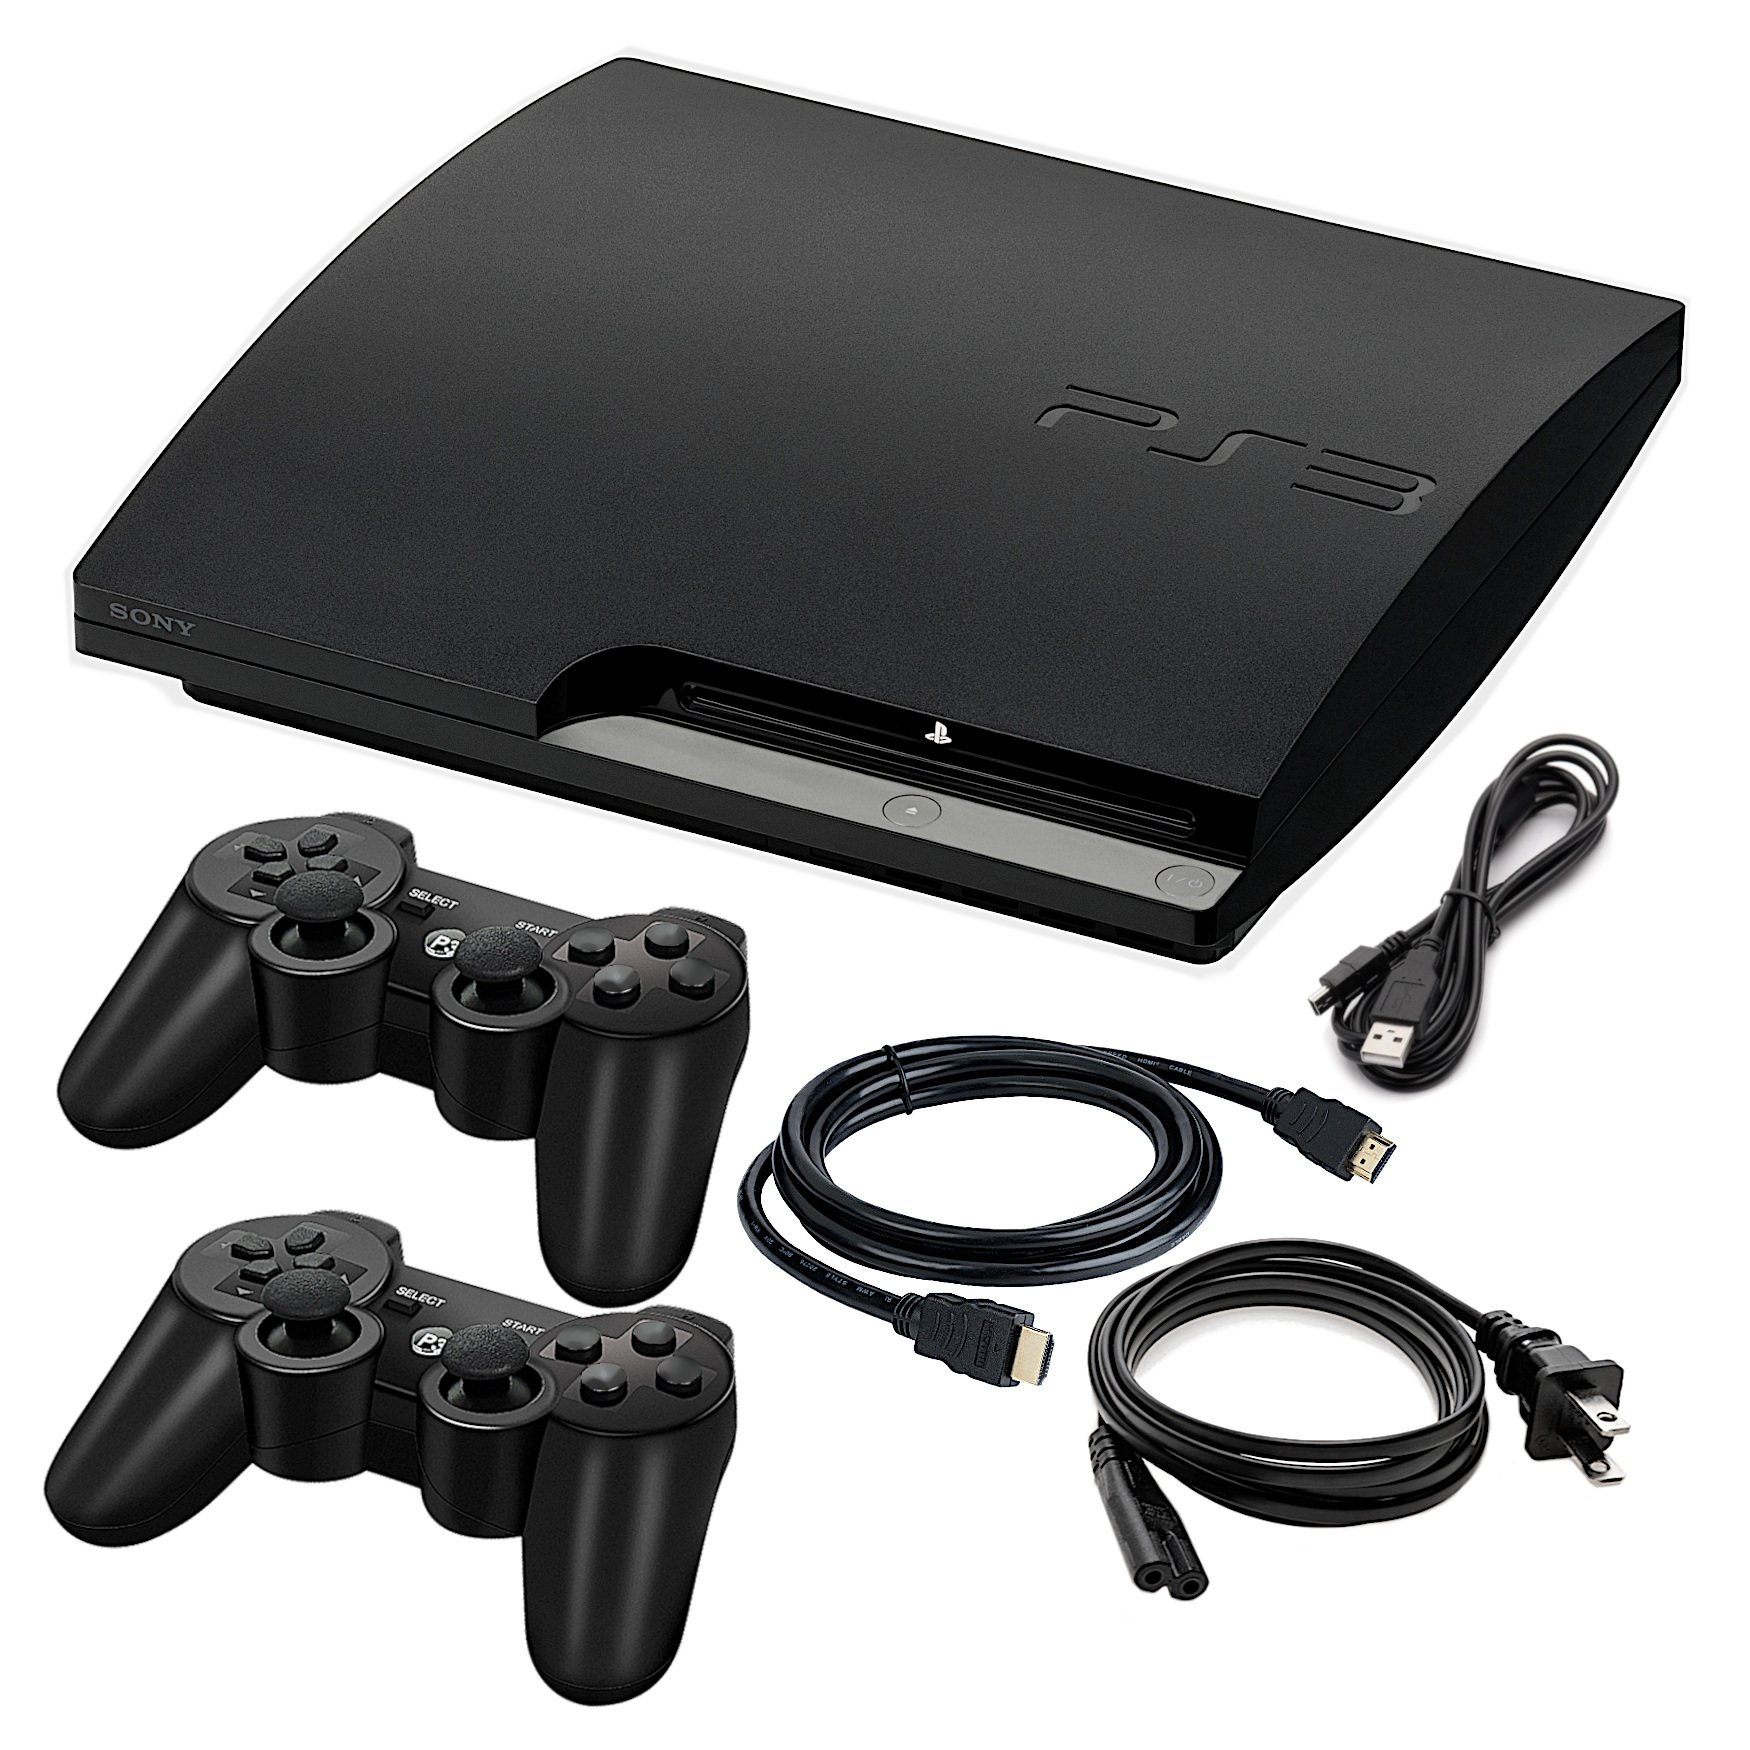 Sony PlayStation 3 PAL Video Games with Manual for sale